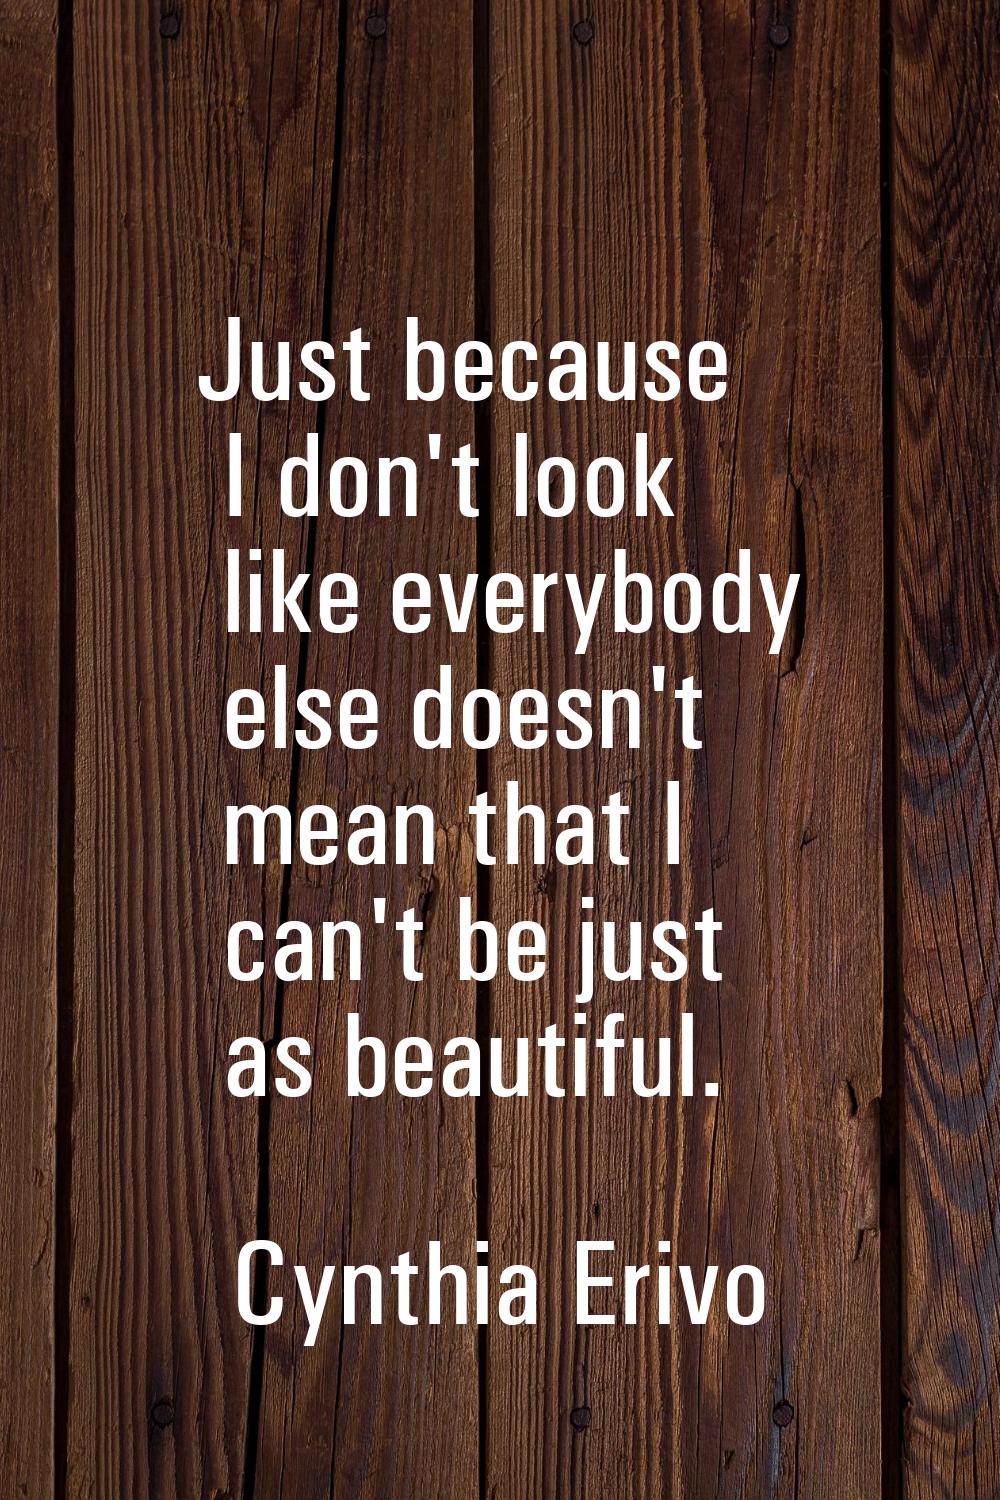 Just because I don't look like everybody else doesn't mean that I can't be just as beautiful.